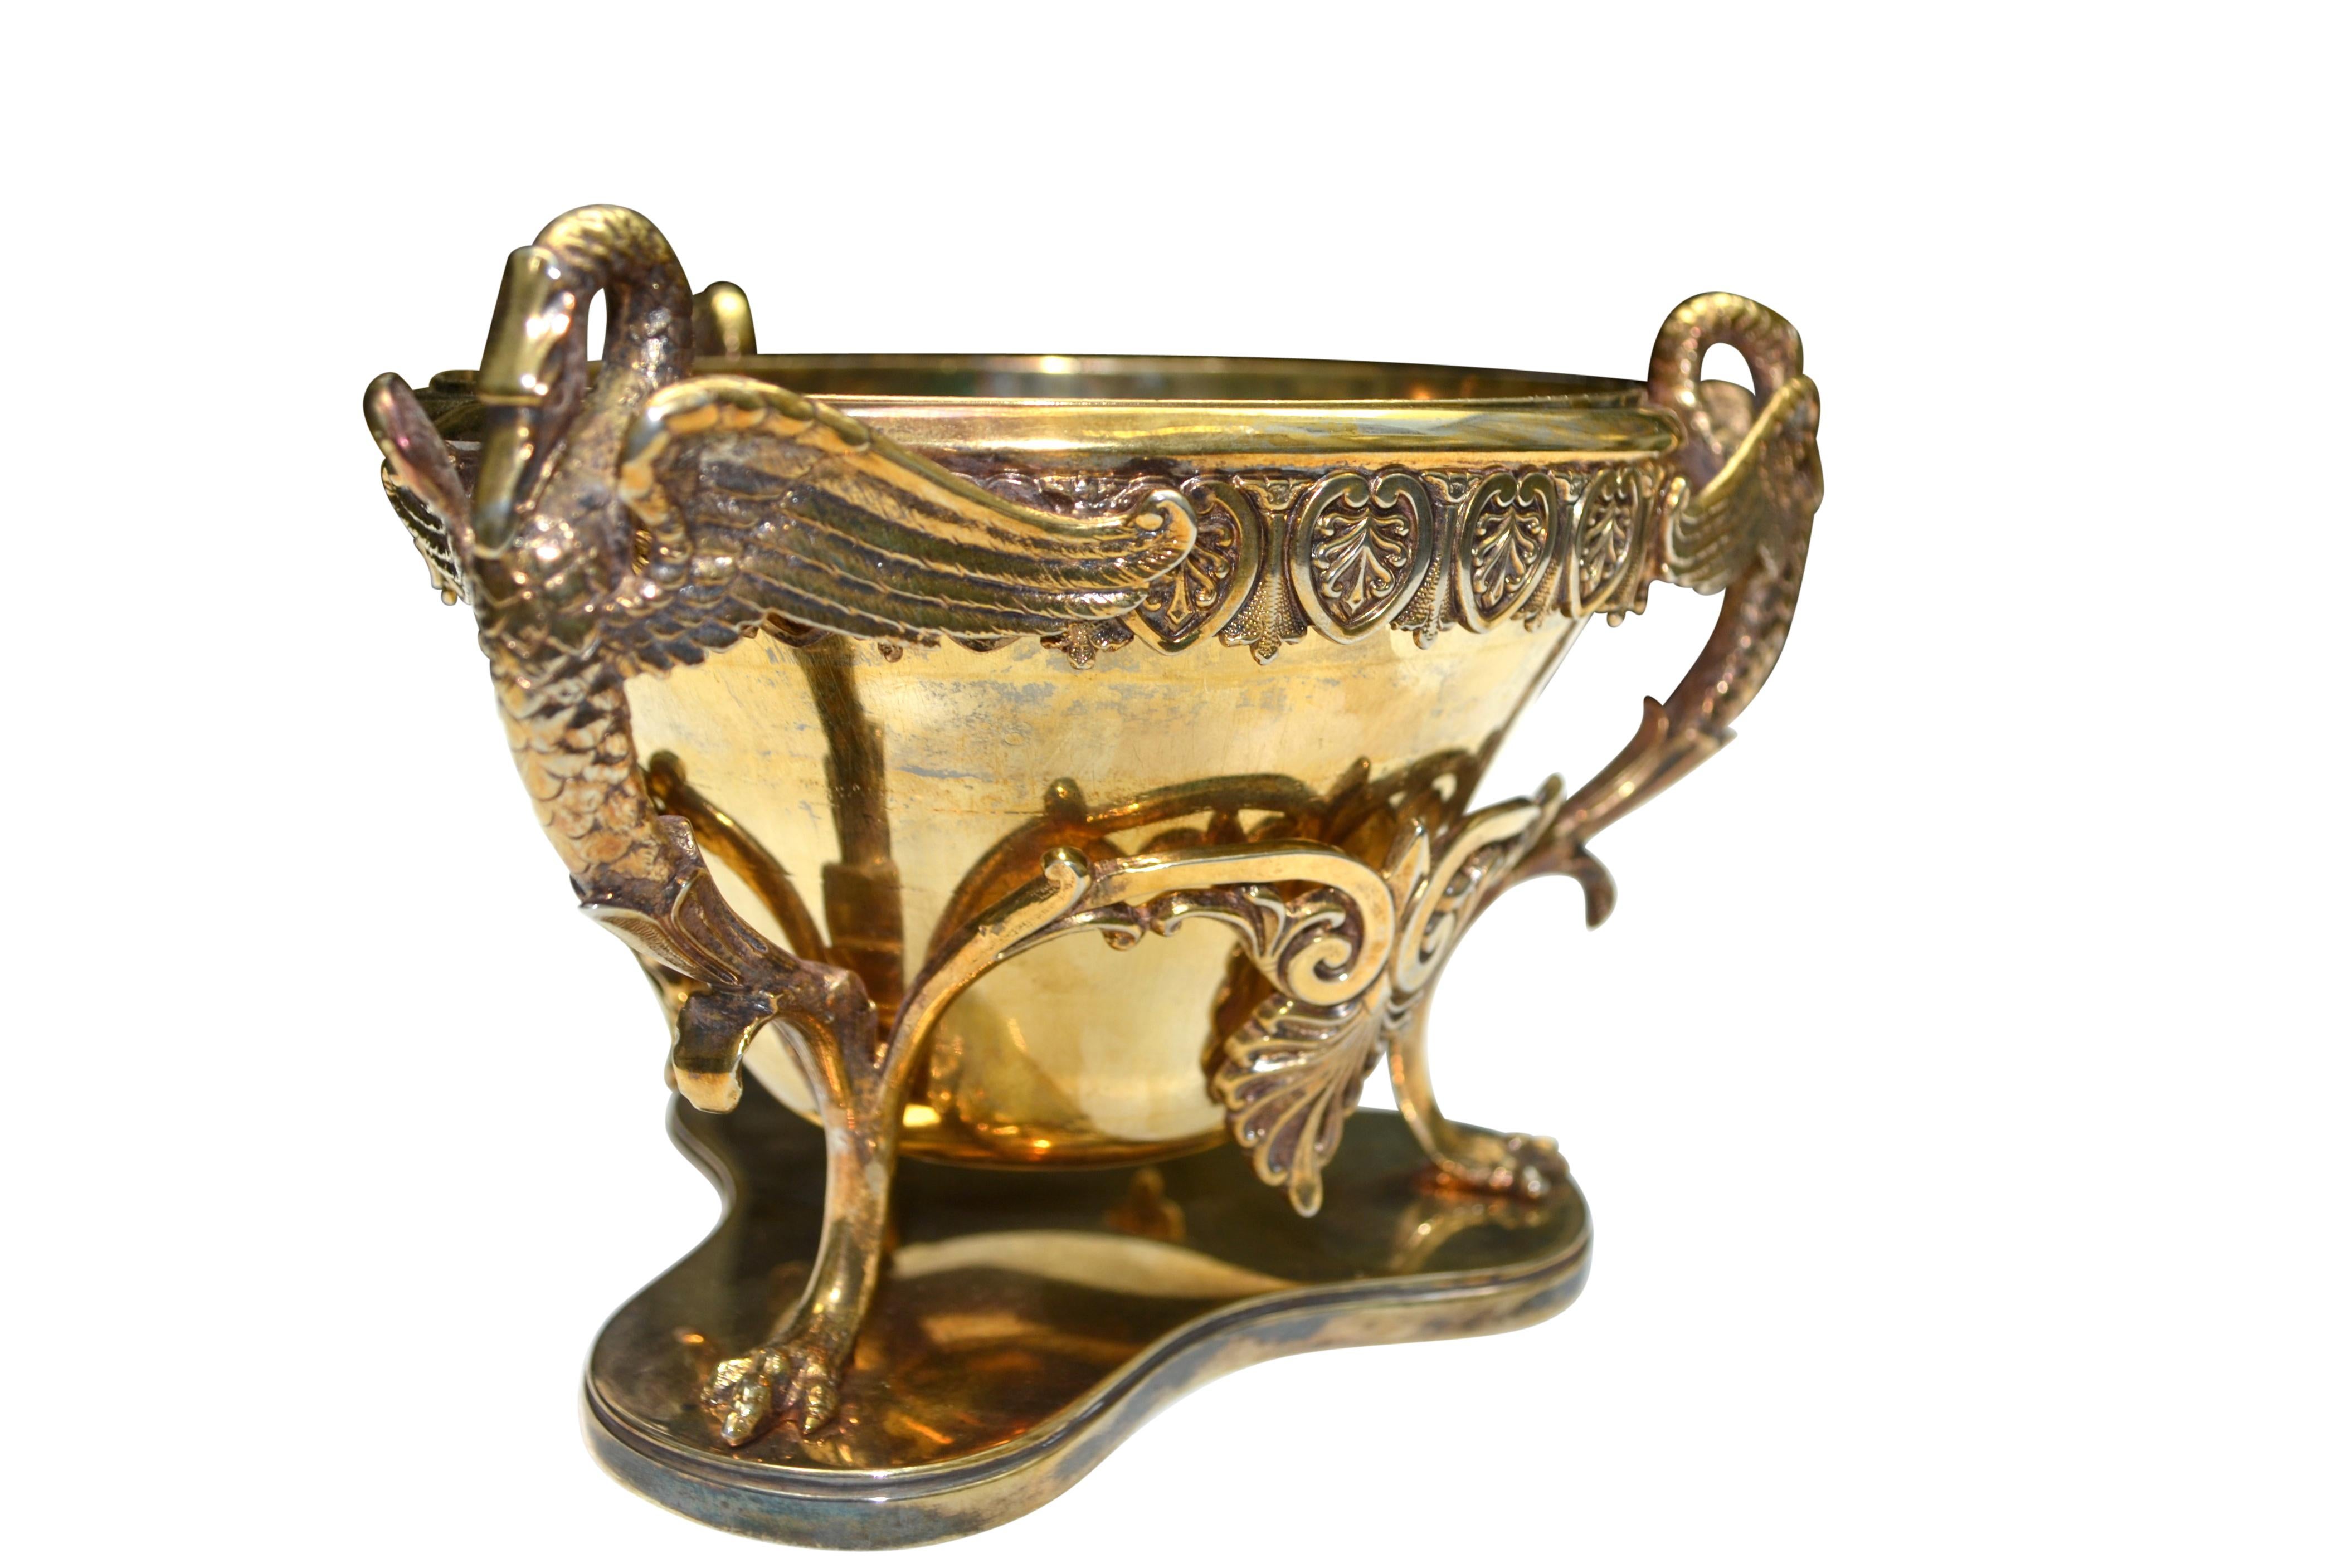 A French Empire style gilded metal bowl with a removable silvered bronze bowl sitting in a gilded silver base with acanthus decoration around the rim and elaborate swan heads supported by a tri-form base.